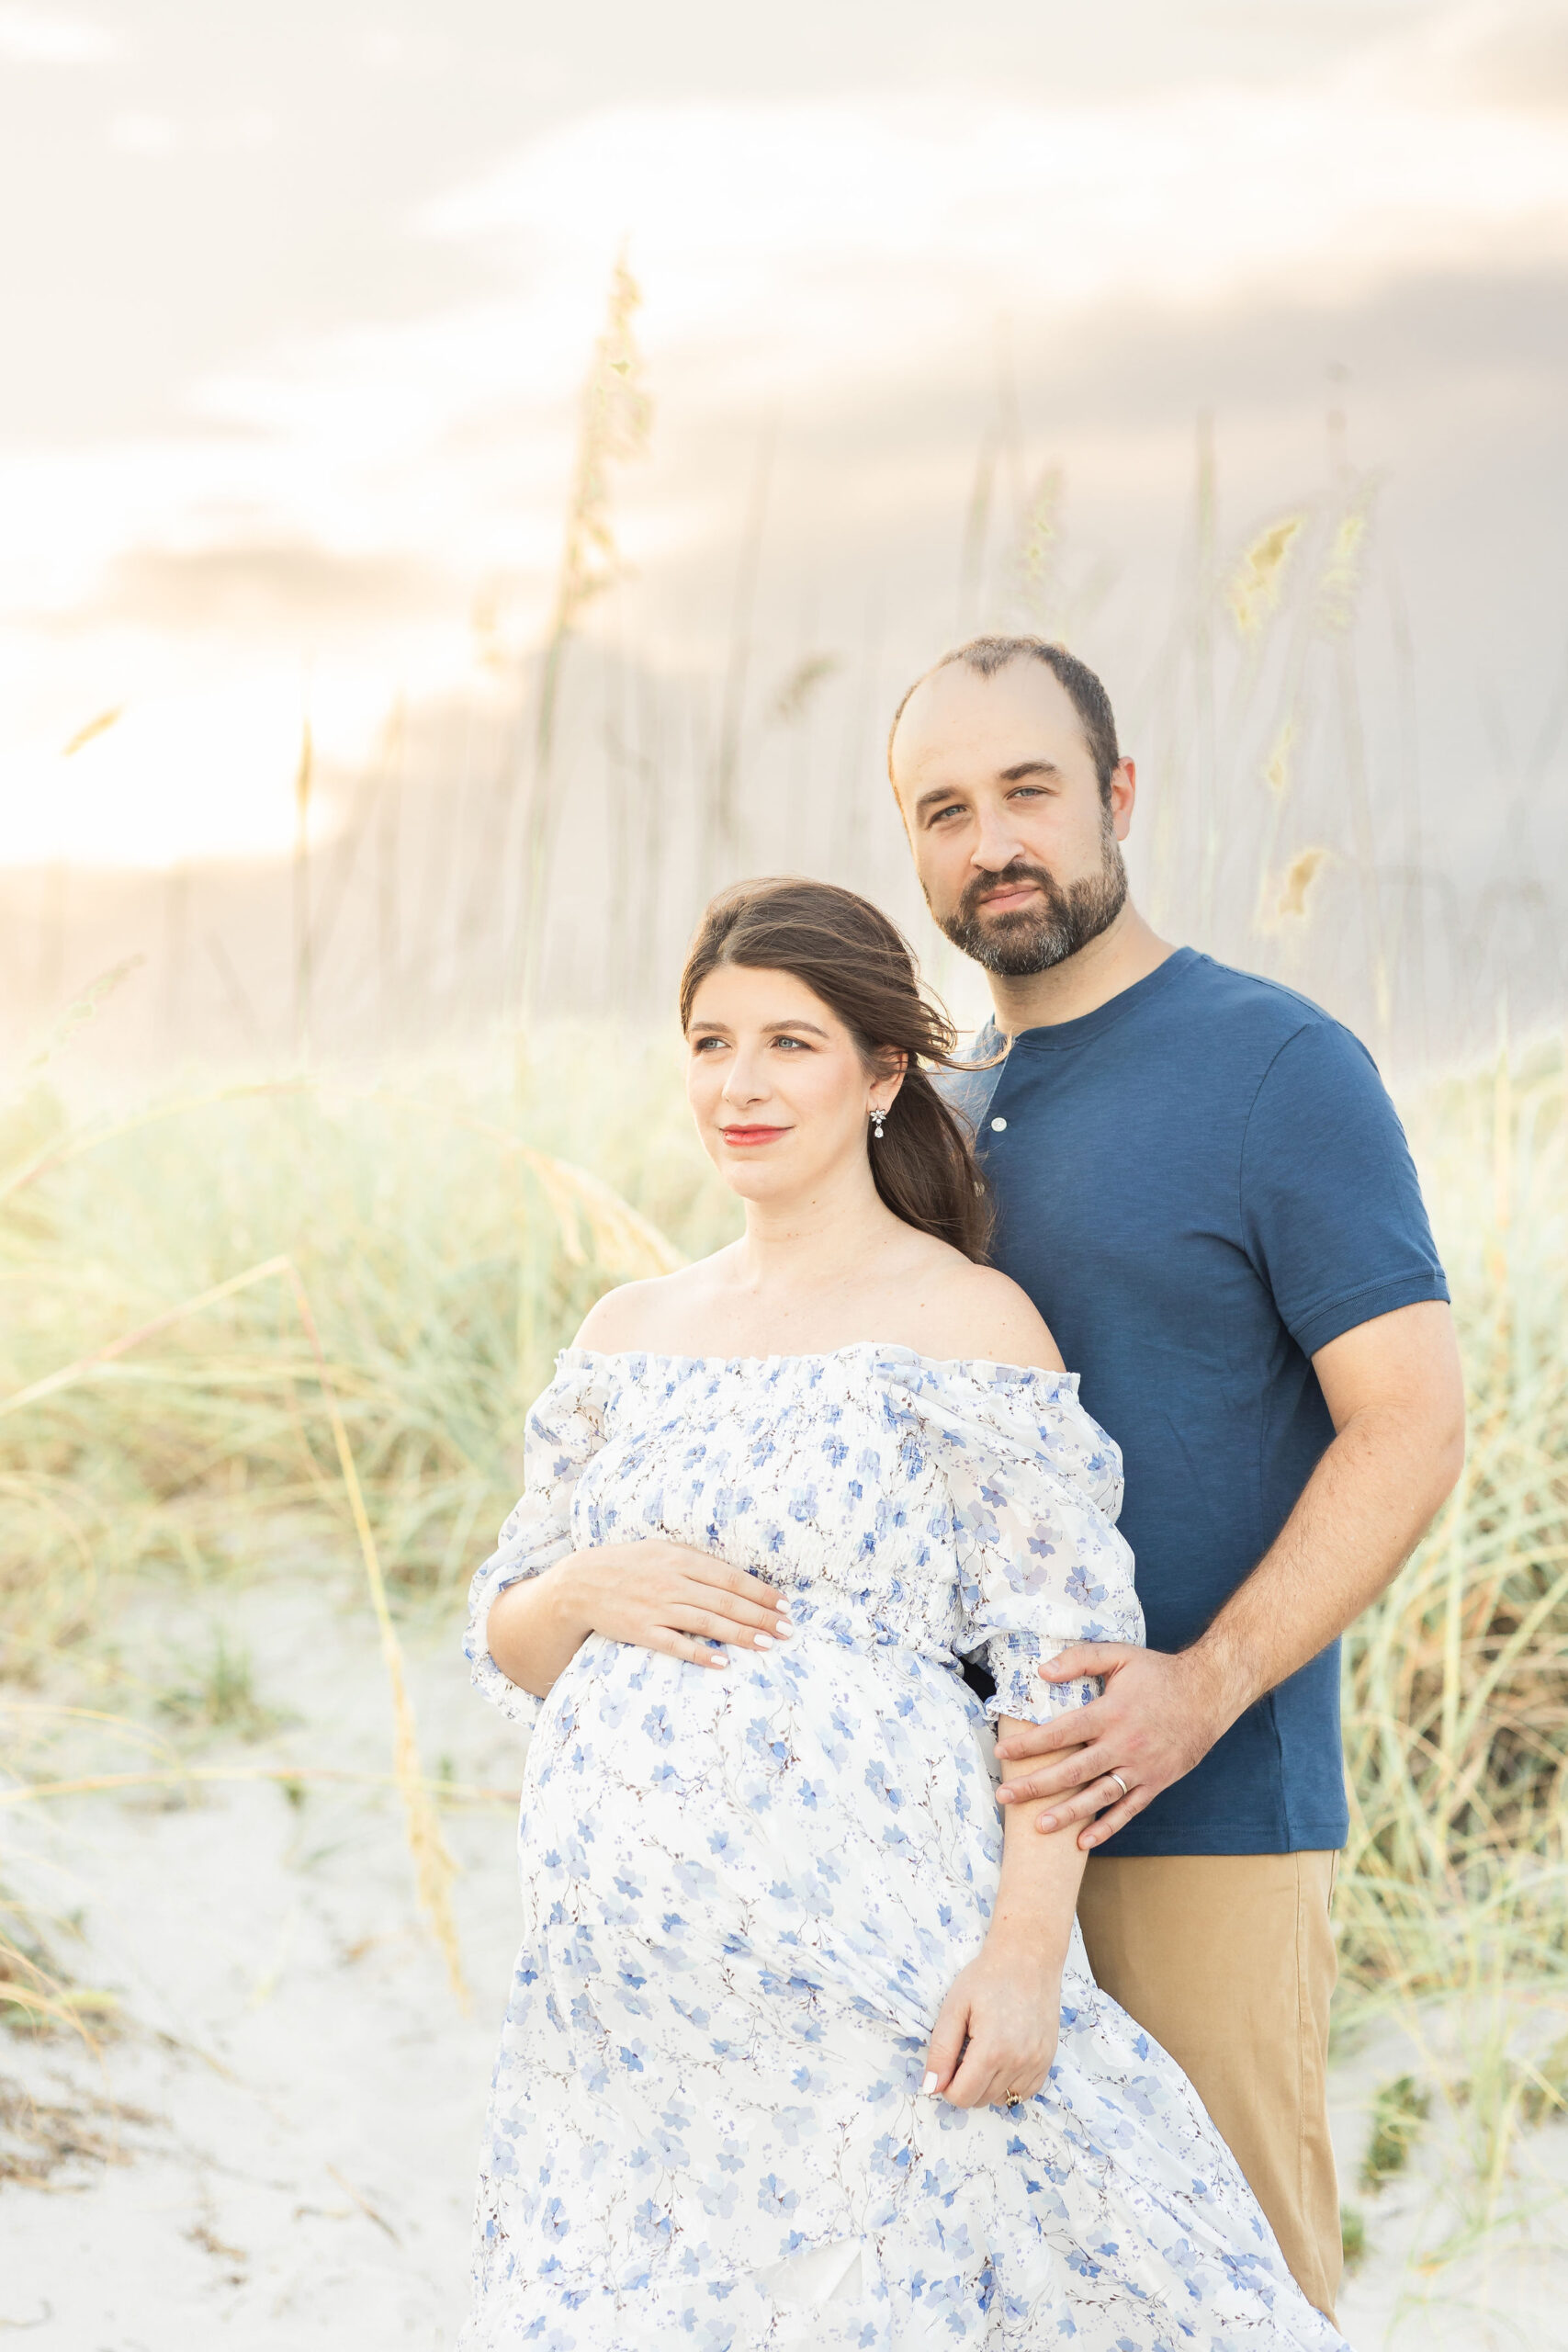 An expecting father in a blue shirt stands behind his pregnant wife on a beach at sunset